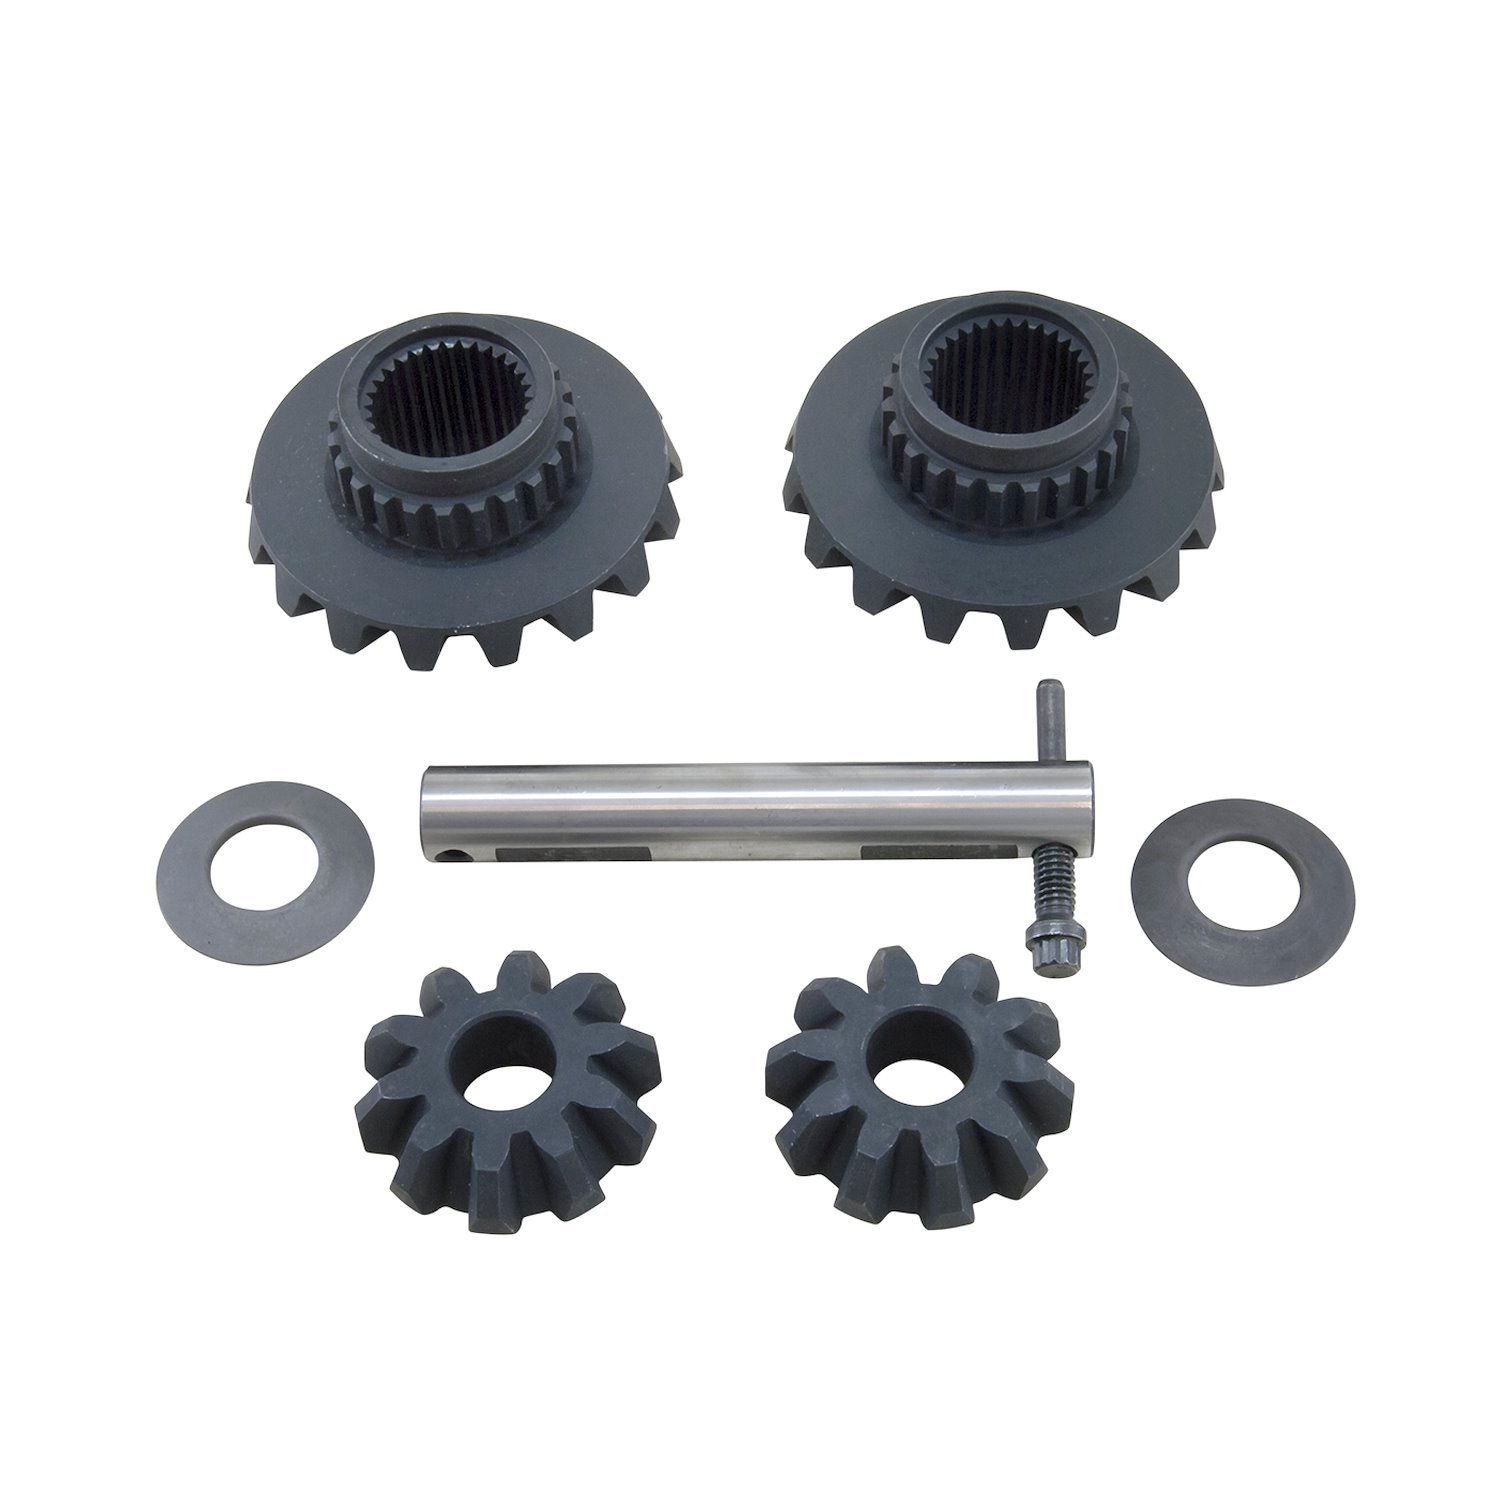 Replacement Positraction Internals For Dana 44-Hd With 30